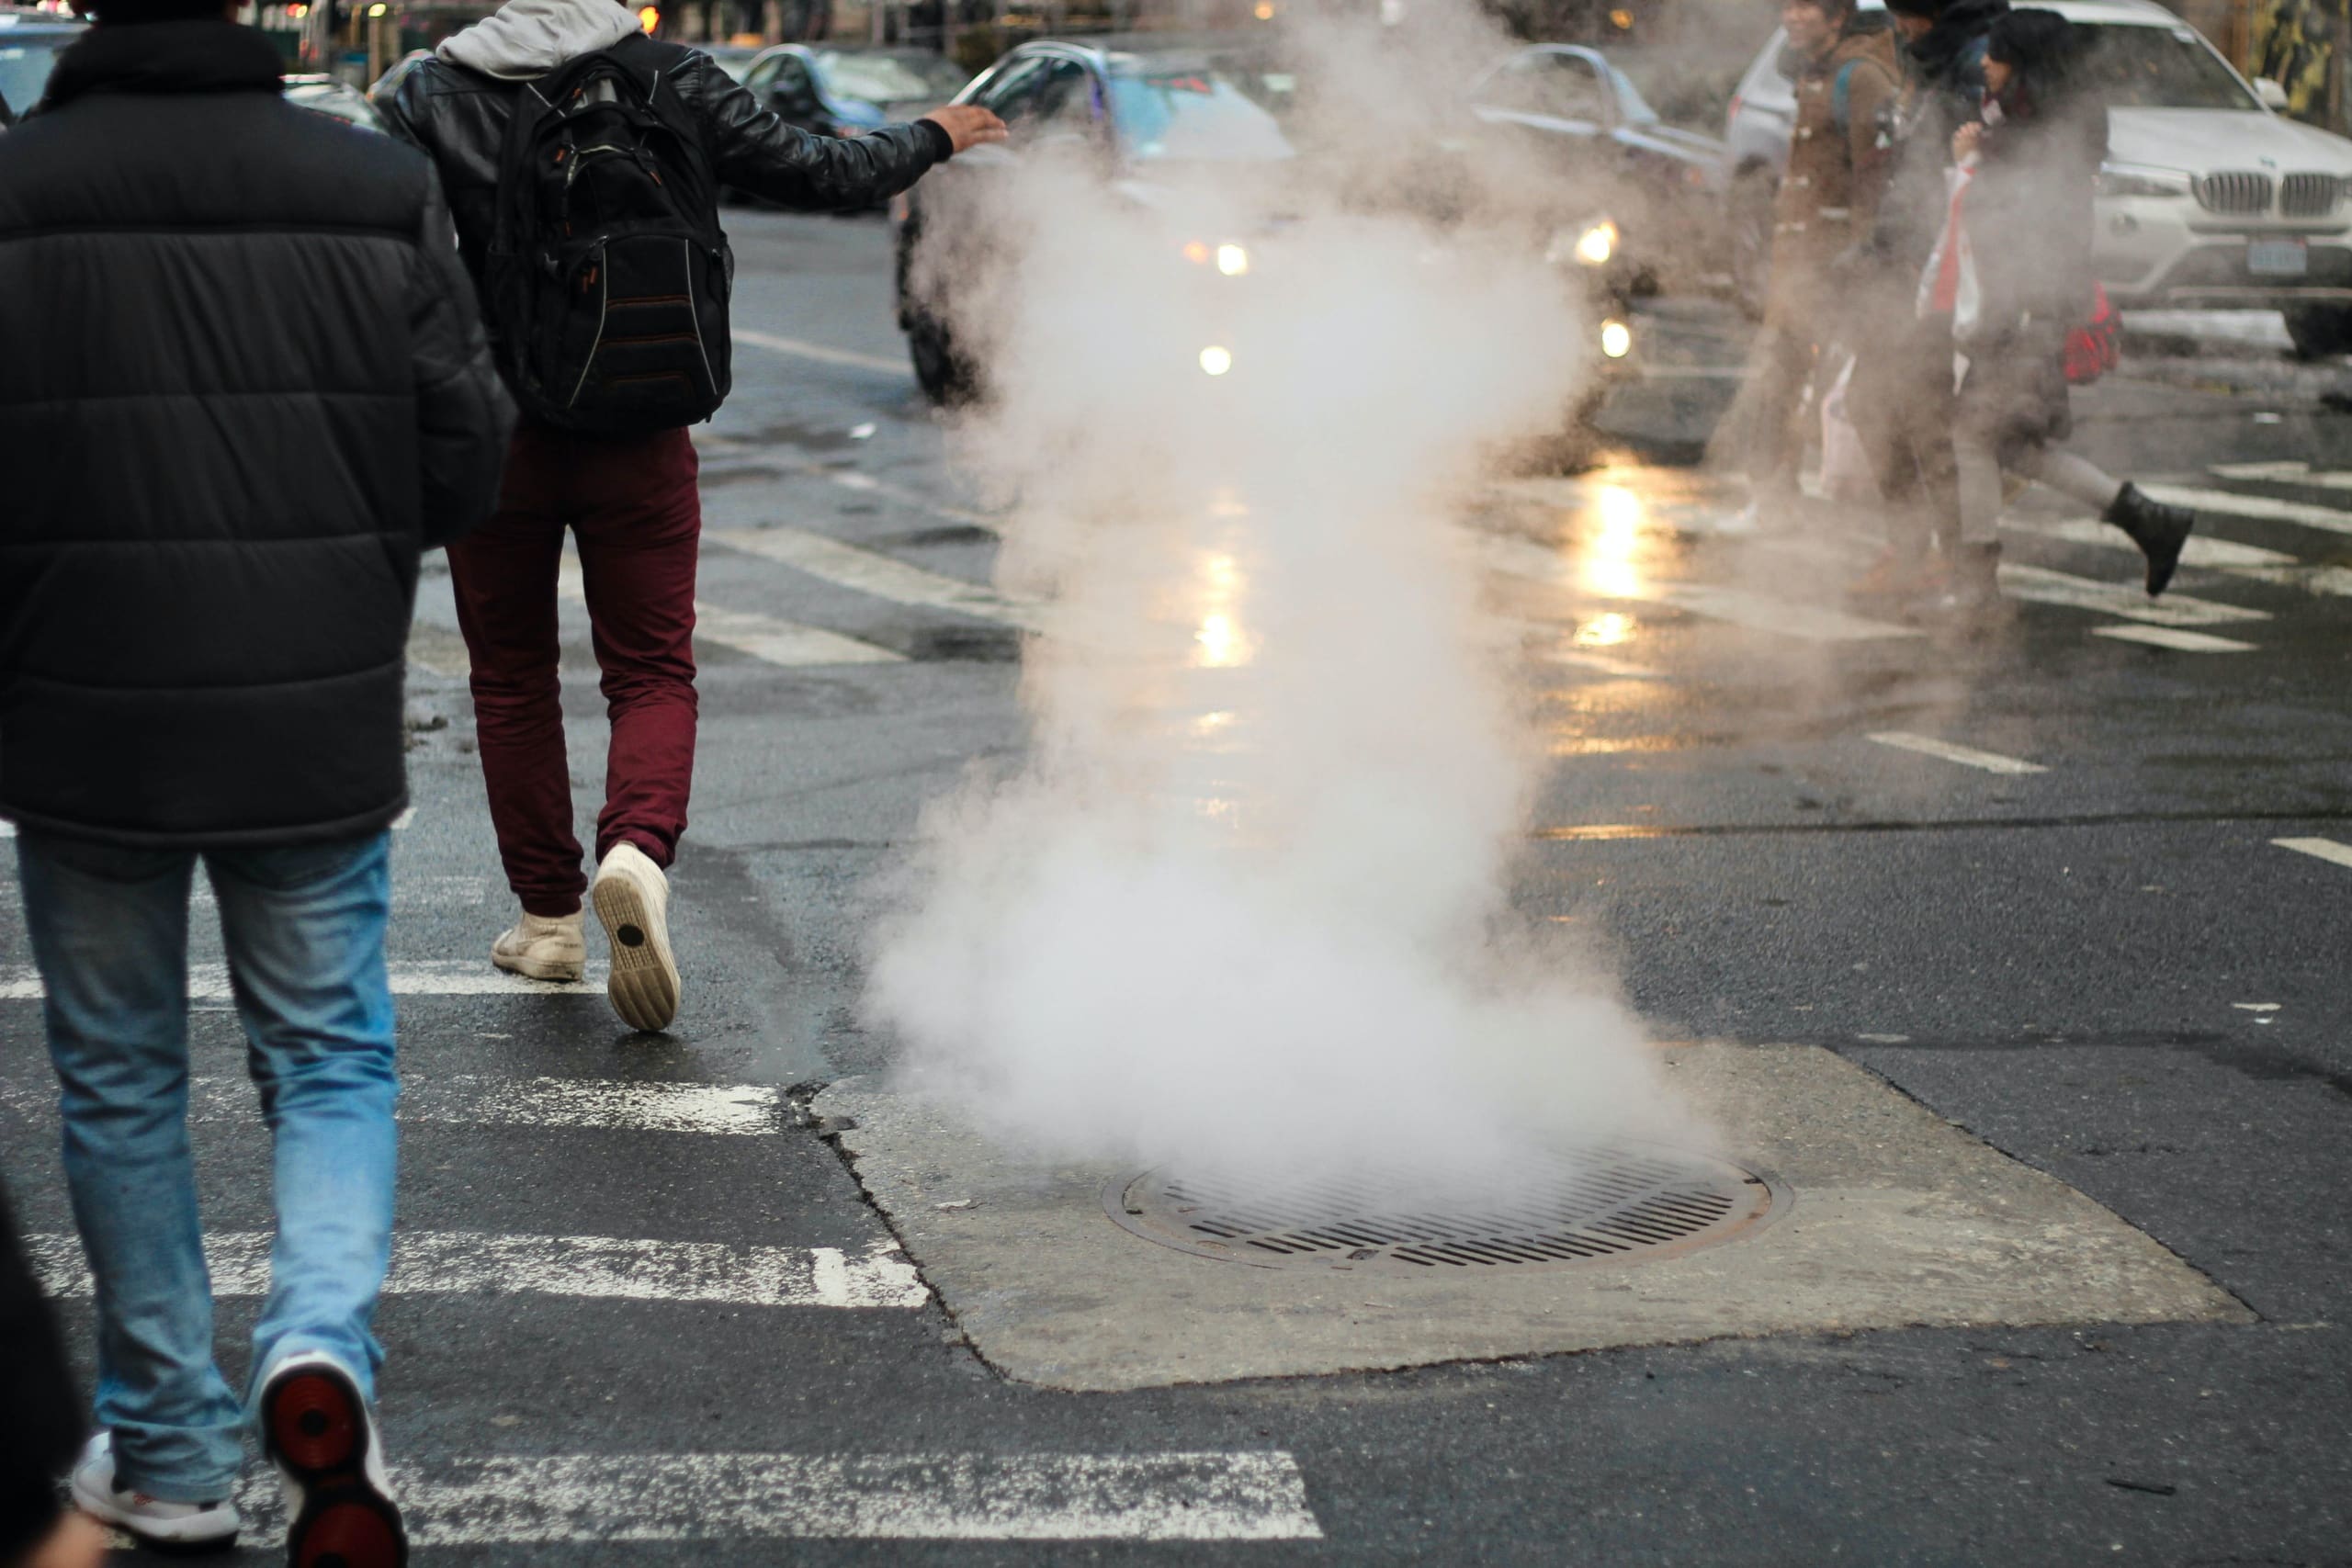 Image of street showing steam escaping from manhole